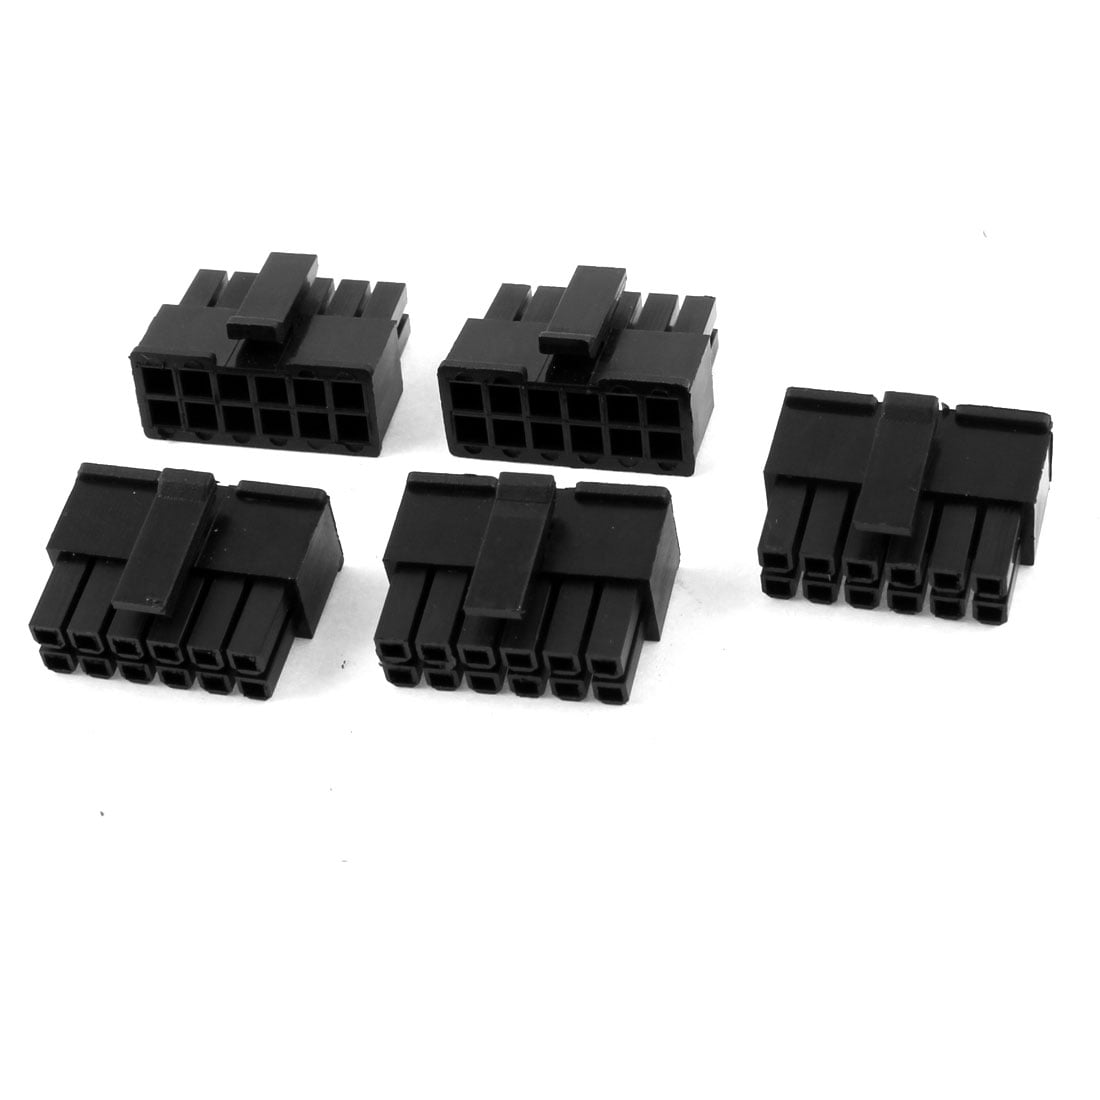 id:30b 85 32 874 New Lon0167 5 Pcs Featured 12 Pin 90C reliable efficacy Terminal PC Power Supply ATX Connector for 